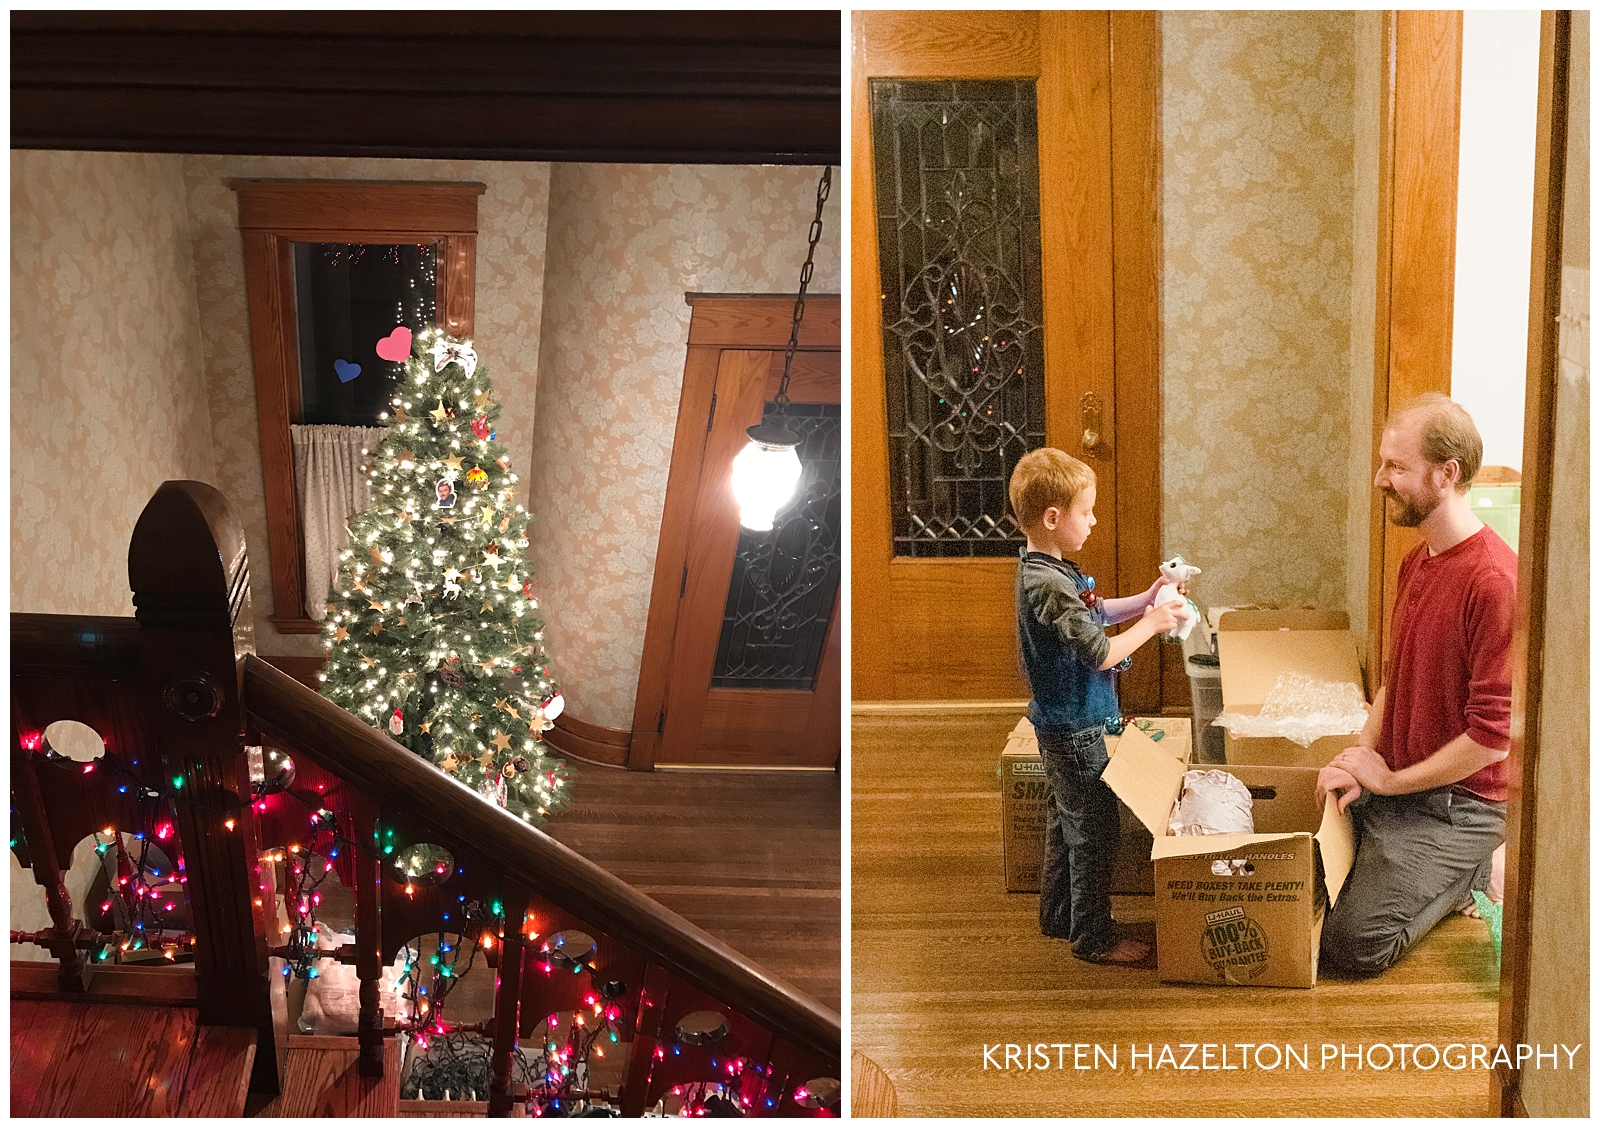 Decorated tree and stairs, father and son getting out christmas decorations